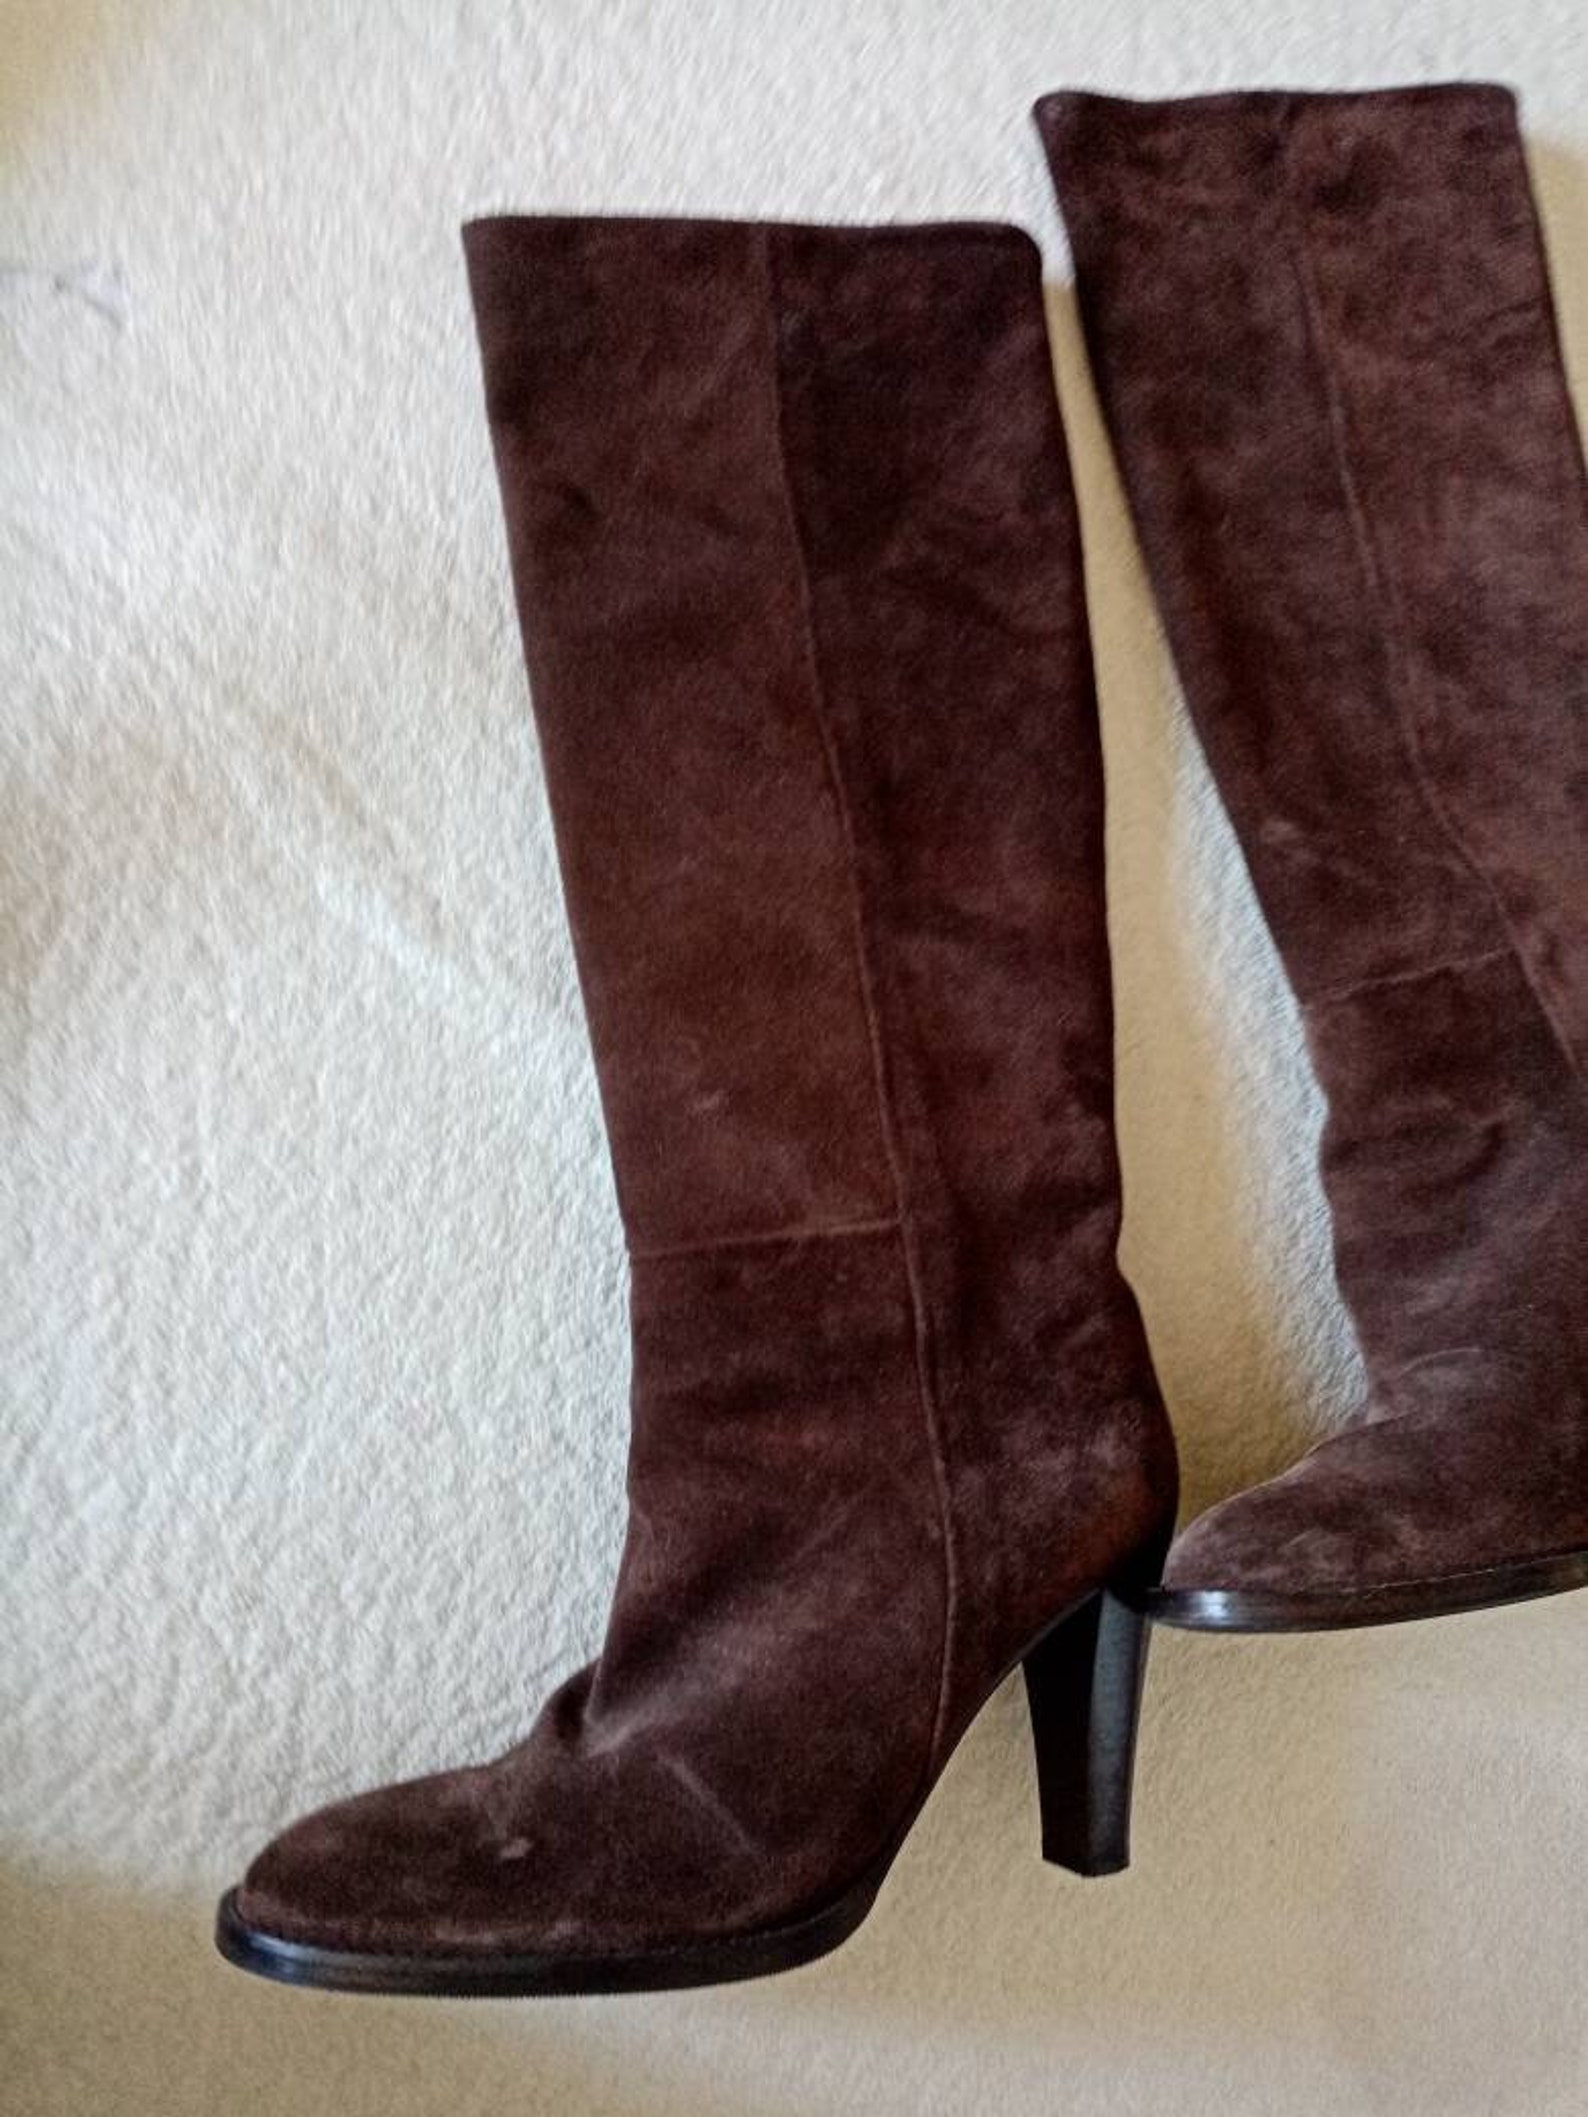 Vintage Max Mara Max&co brown suede heeled boots knee high | Etsy